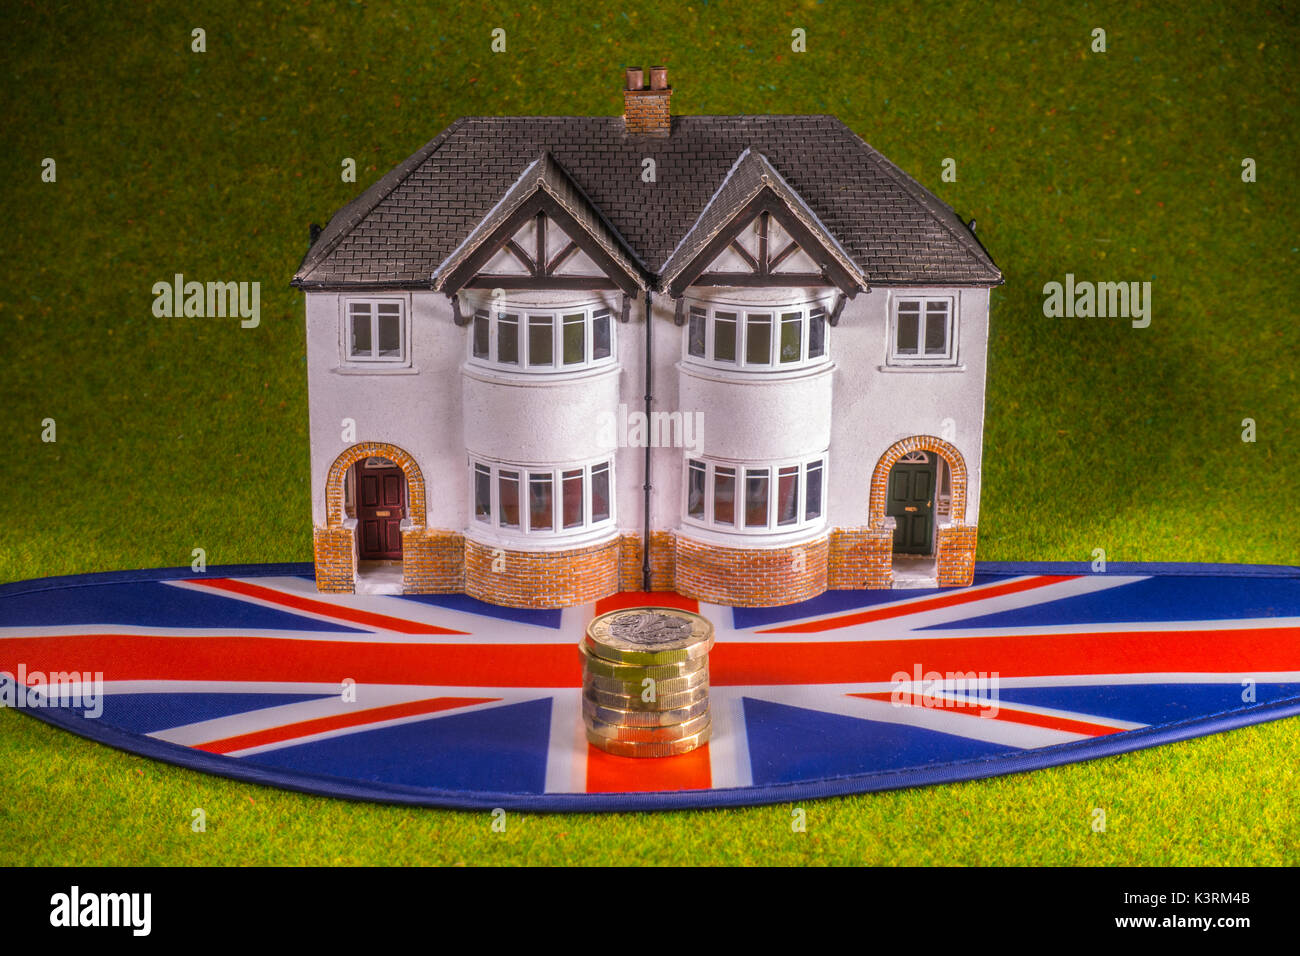 Model house, sterling pound coins (with new £1 coin) and Union Jack, to depict costs like a UK interest rate rise, home buying, renting, moving, etc. Stock Photo